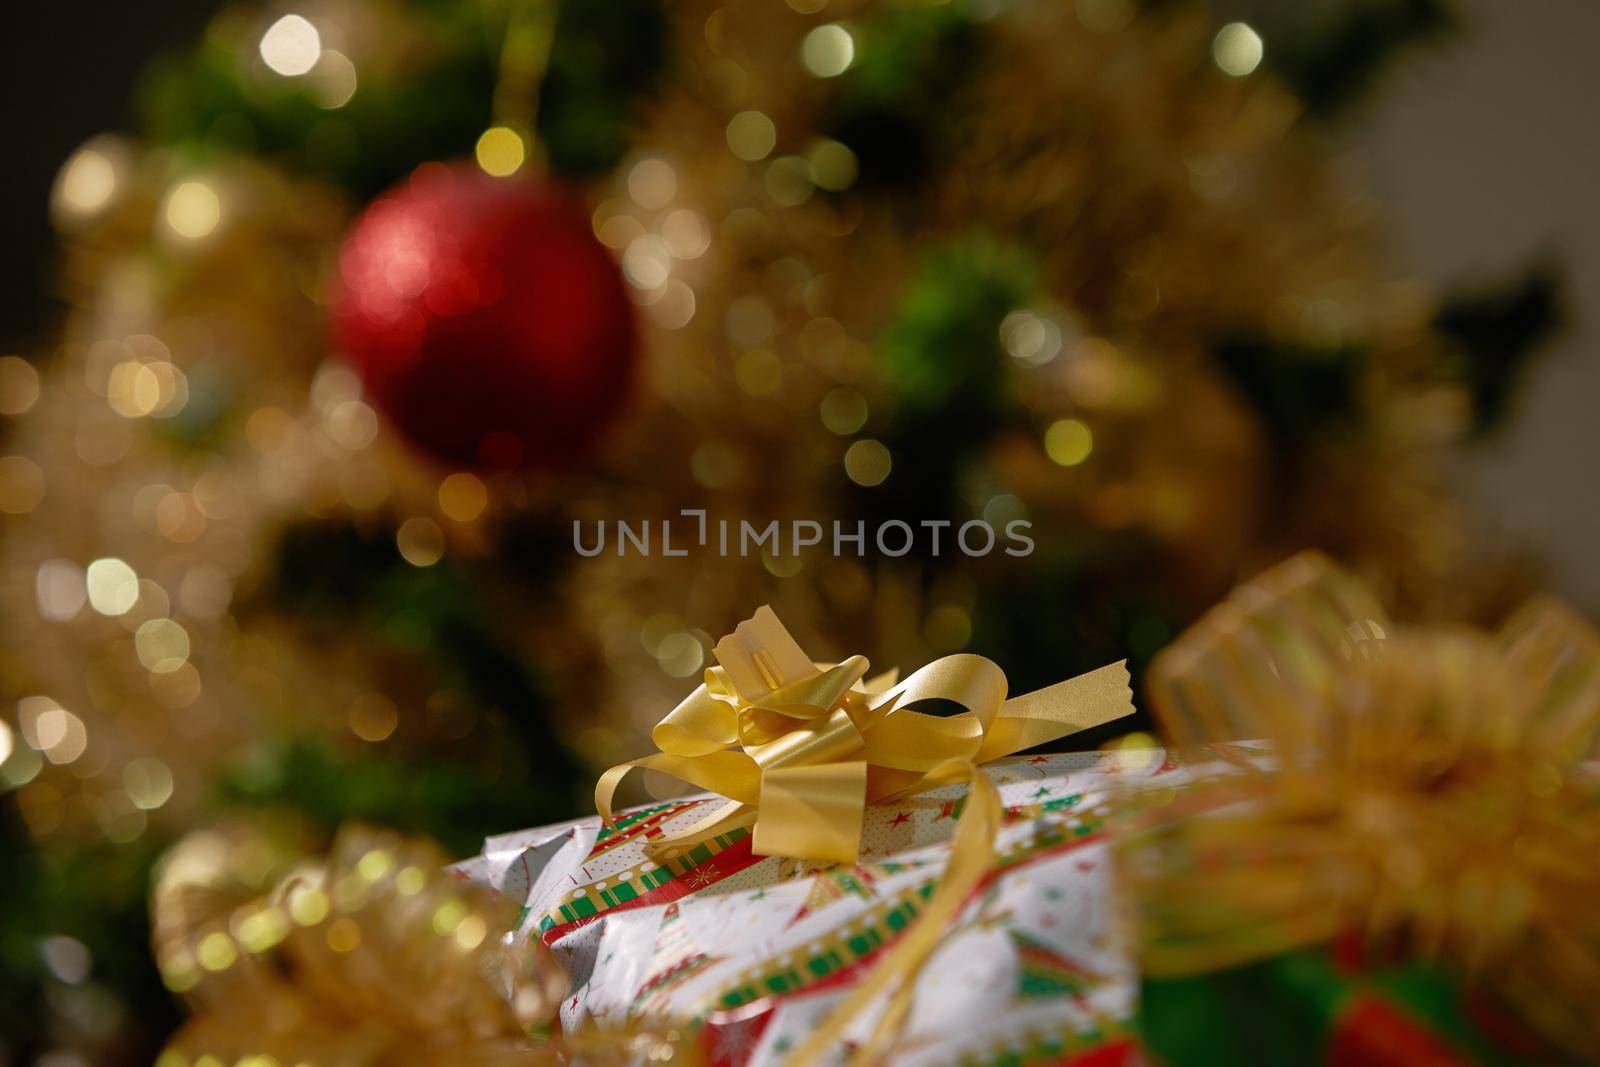 Stacks of Christmas Presents Under a Christmas Tree with Defocused Lights.